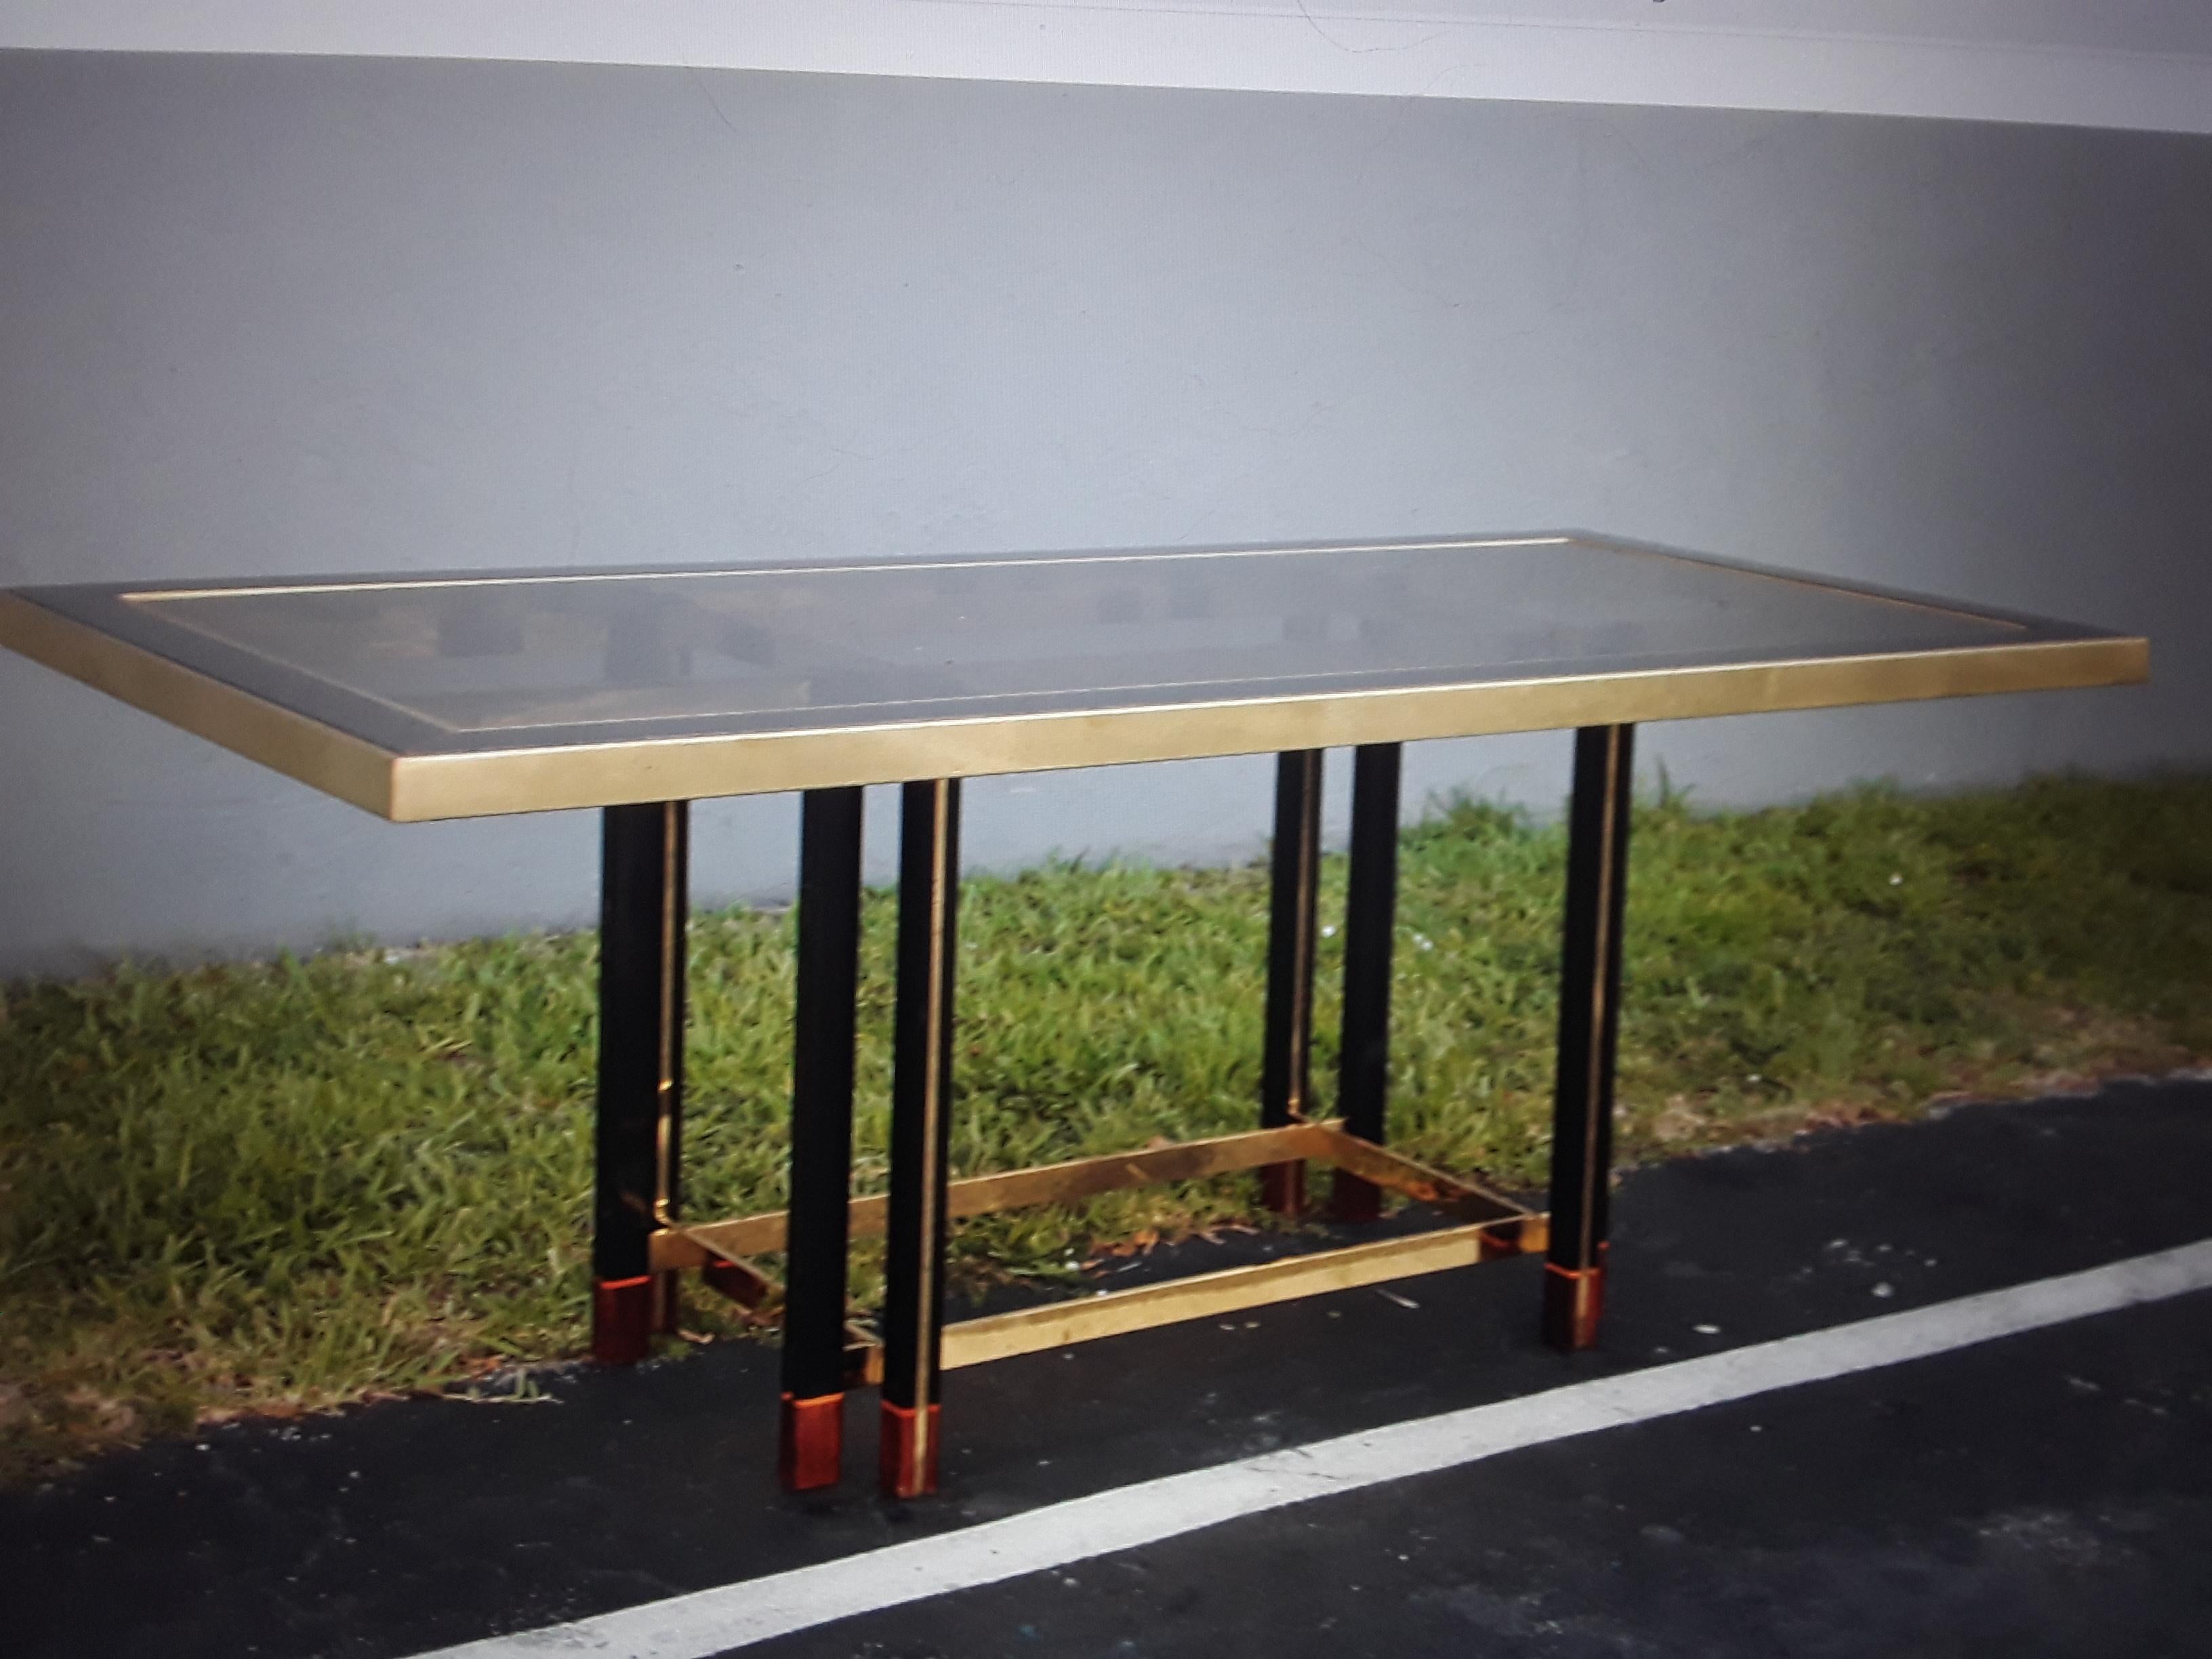 1950's Italian Mid Century Modern Designer Dining Table. Constructed of Brass/ Macassar Ebony wood and Bronze toned Glass. This dining table is signed by 